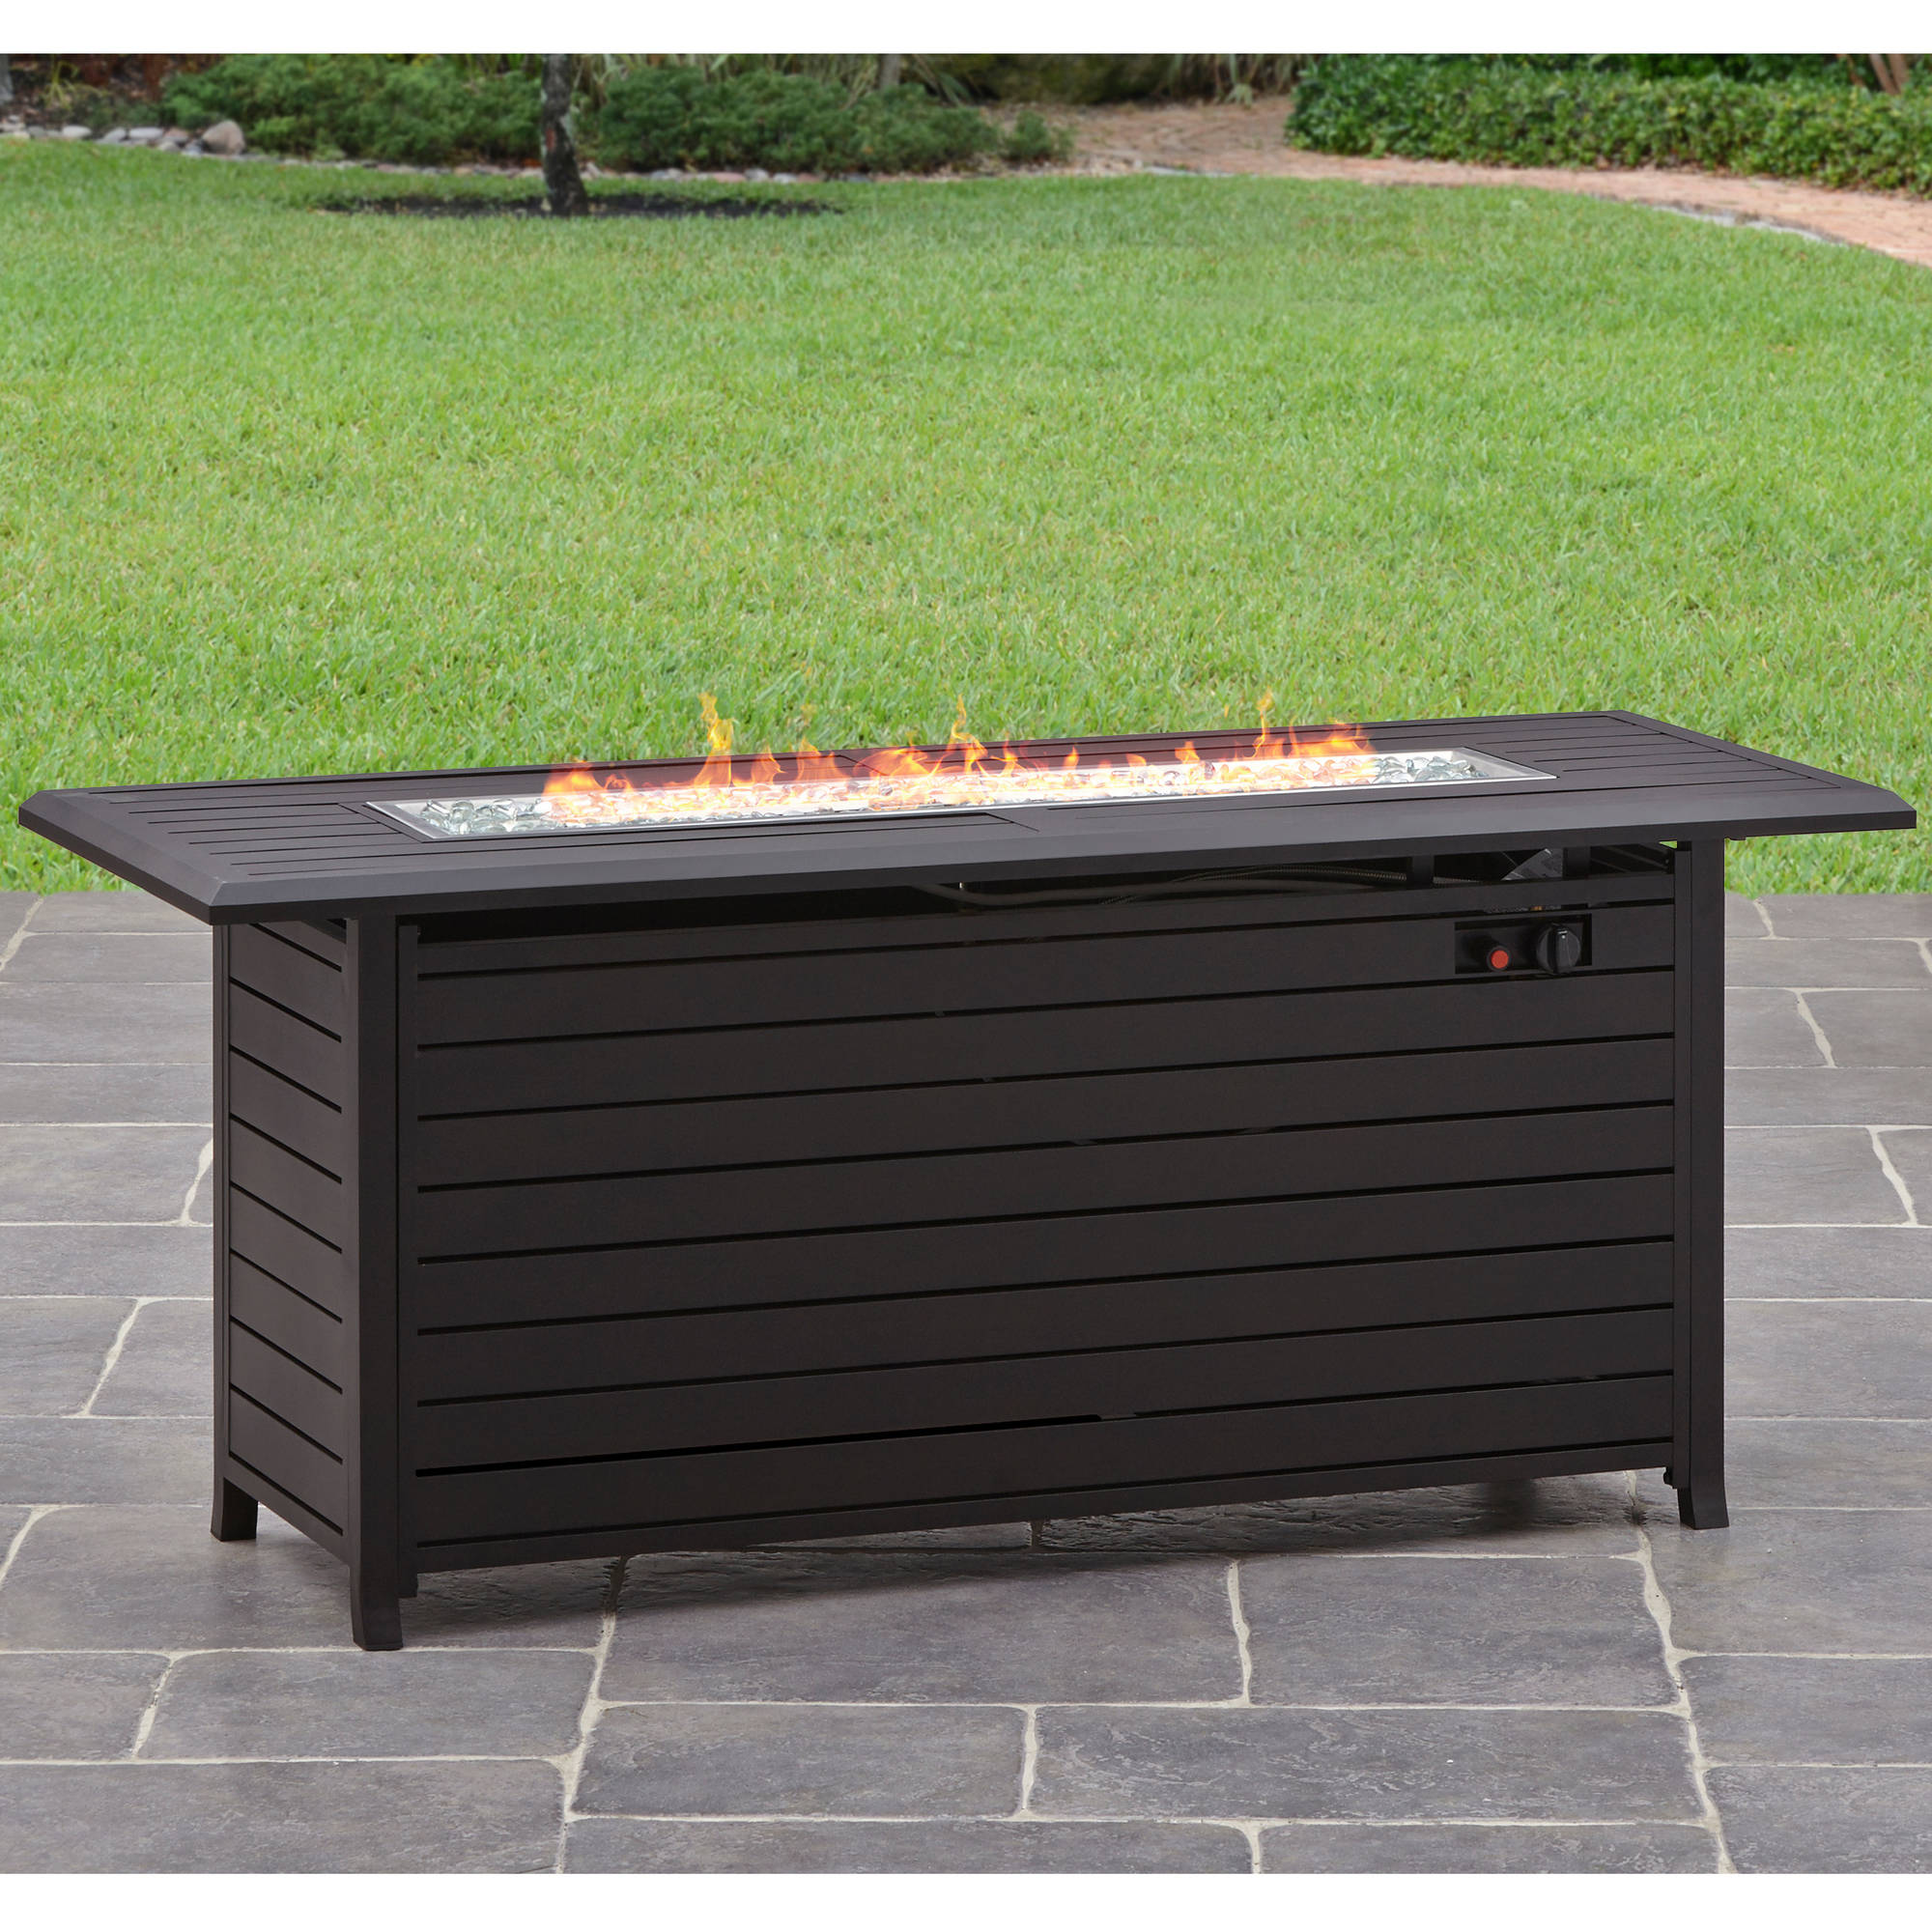 Better Homes & Gardens Carter Hills 57" x 21" 50000 BTU Propane Gas Dark Bronze Finish Stainless Steel and Aluminum Fire Pit Table - image 1 of 17